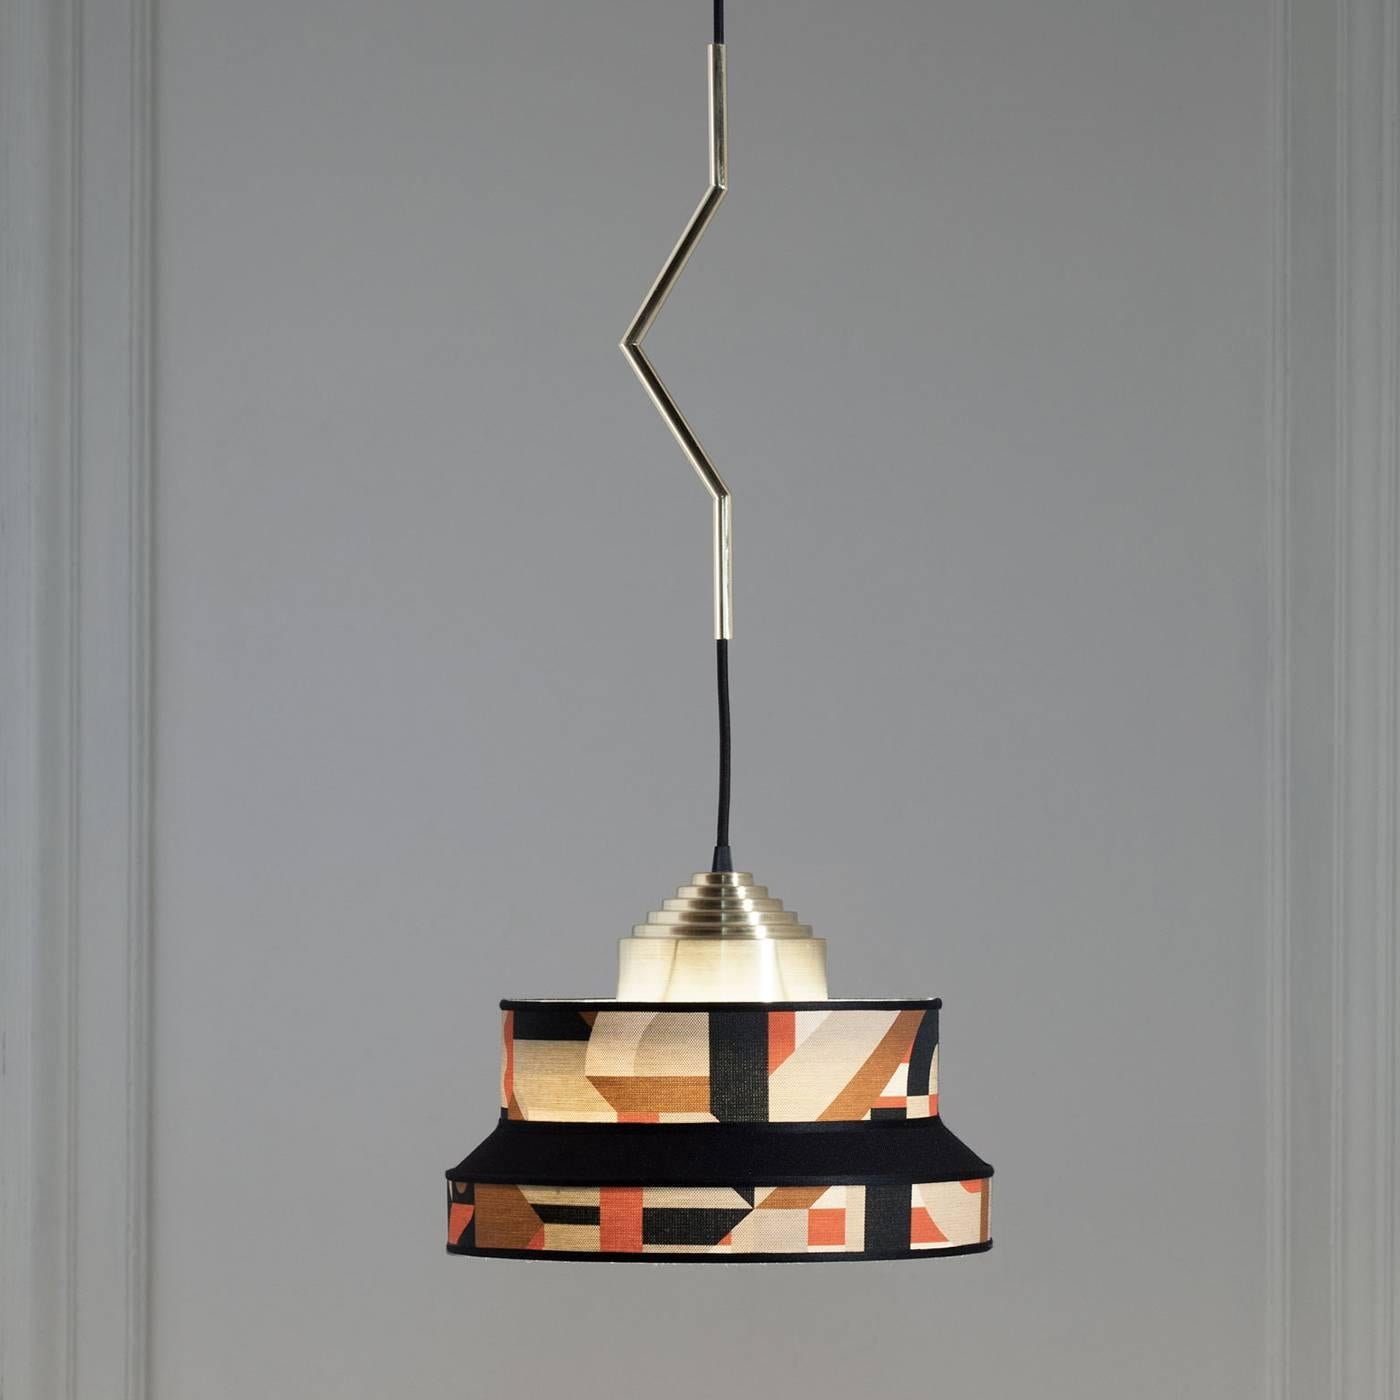 This exquisite pendant lamp reinterprets the lightness and elegance of the 1930s Italian cafes with a brass structure in a warm golden finish and a fabric by Hermés called Perspective Cavaliere Bayadere in a joyful orange and ochre color palette